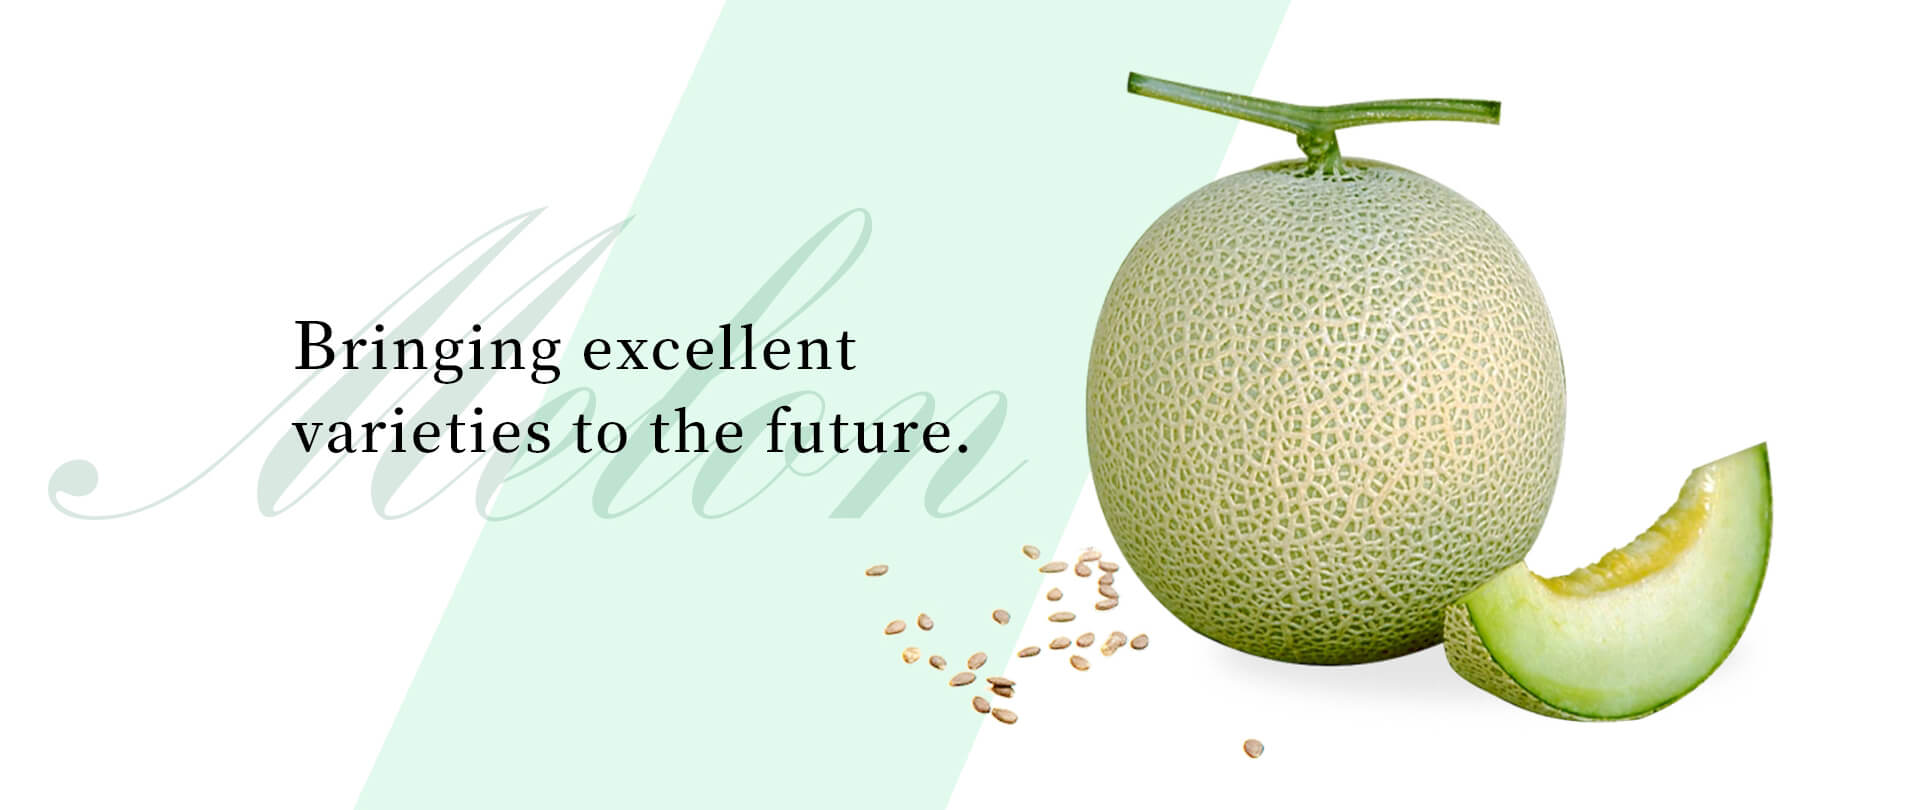 Bringing excellent varieties to the future.